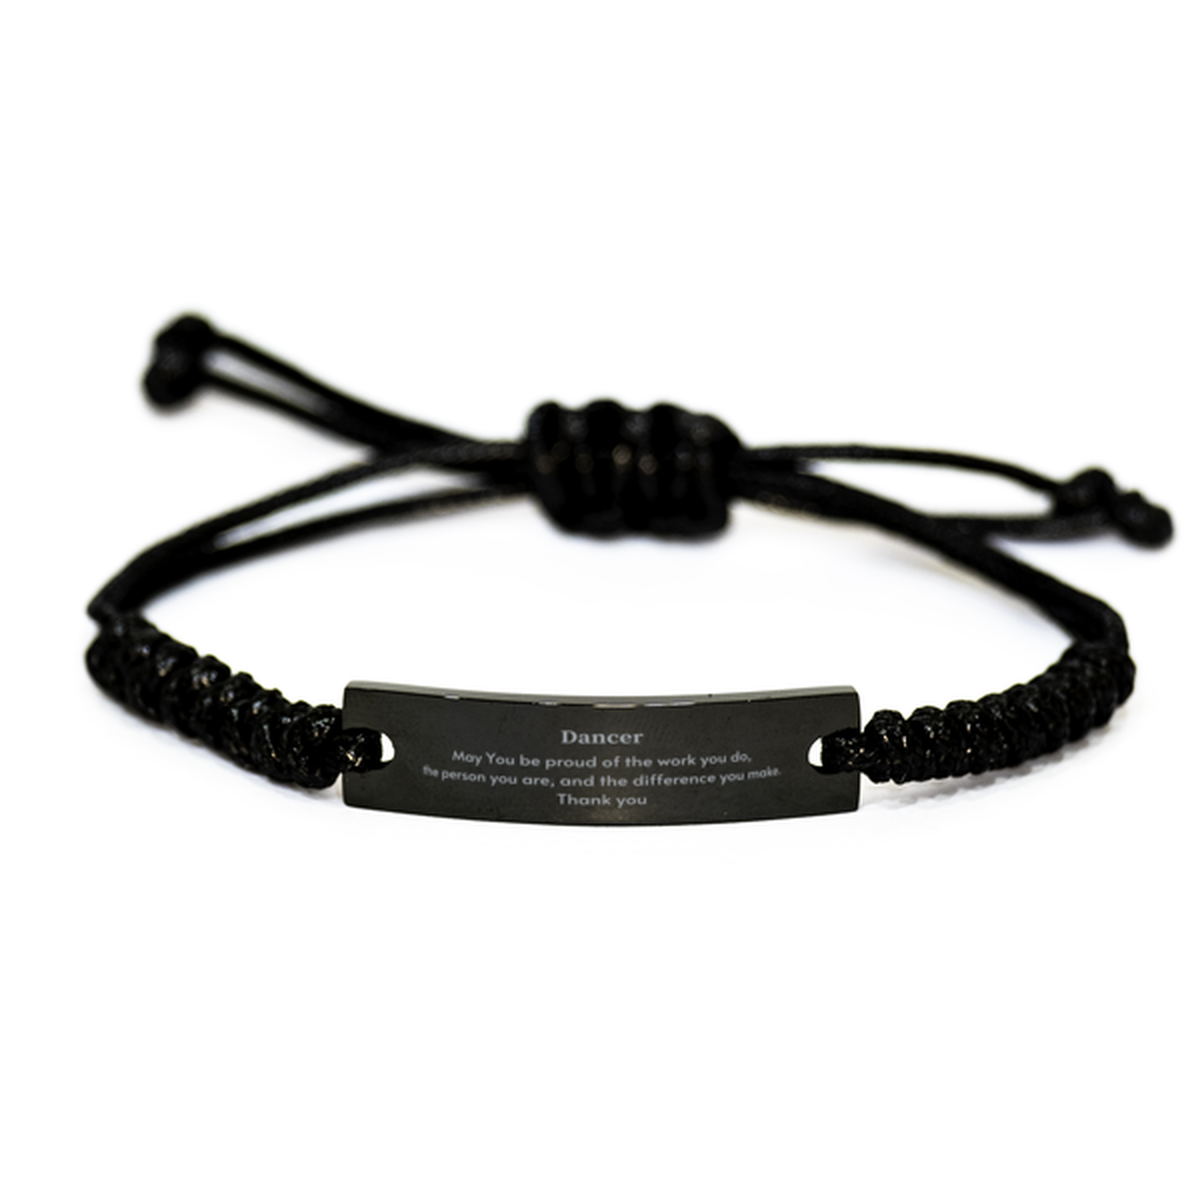 Heartwarming Black Rope Bracelet Retirement Coworkers Gifts for Dancer, Dancer May You be proud of the work you do, the person you are Gifts for Boss Men Women Friends